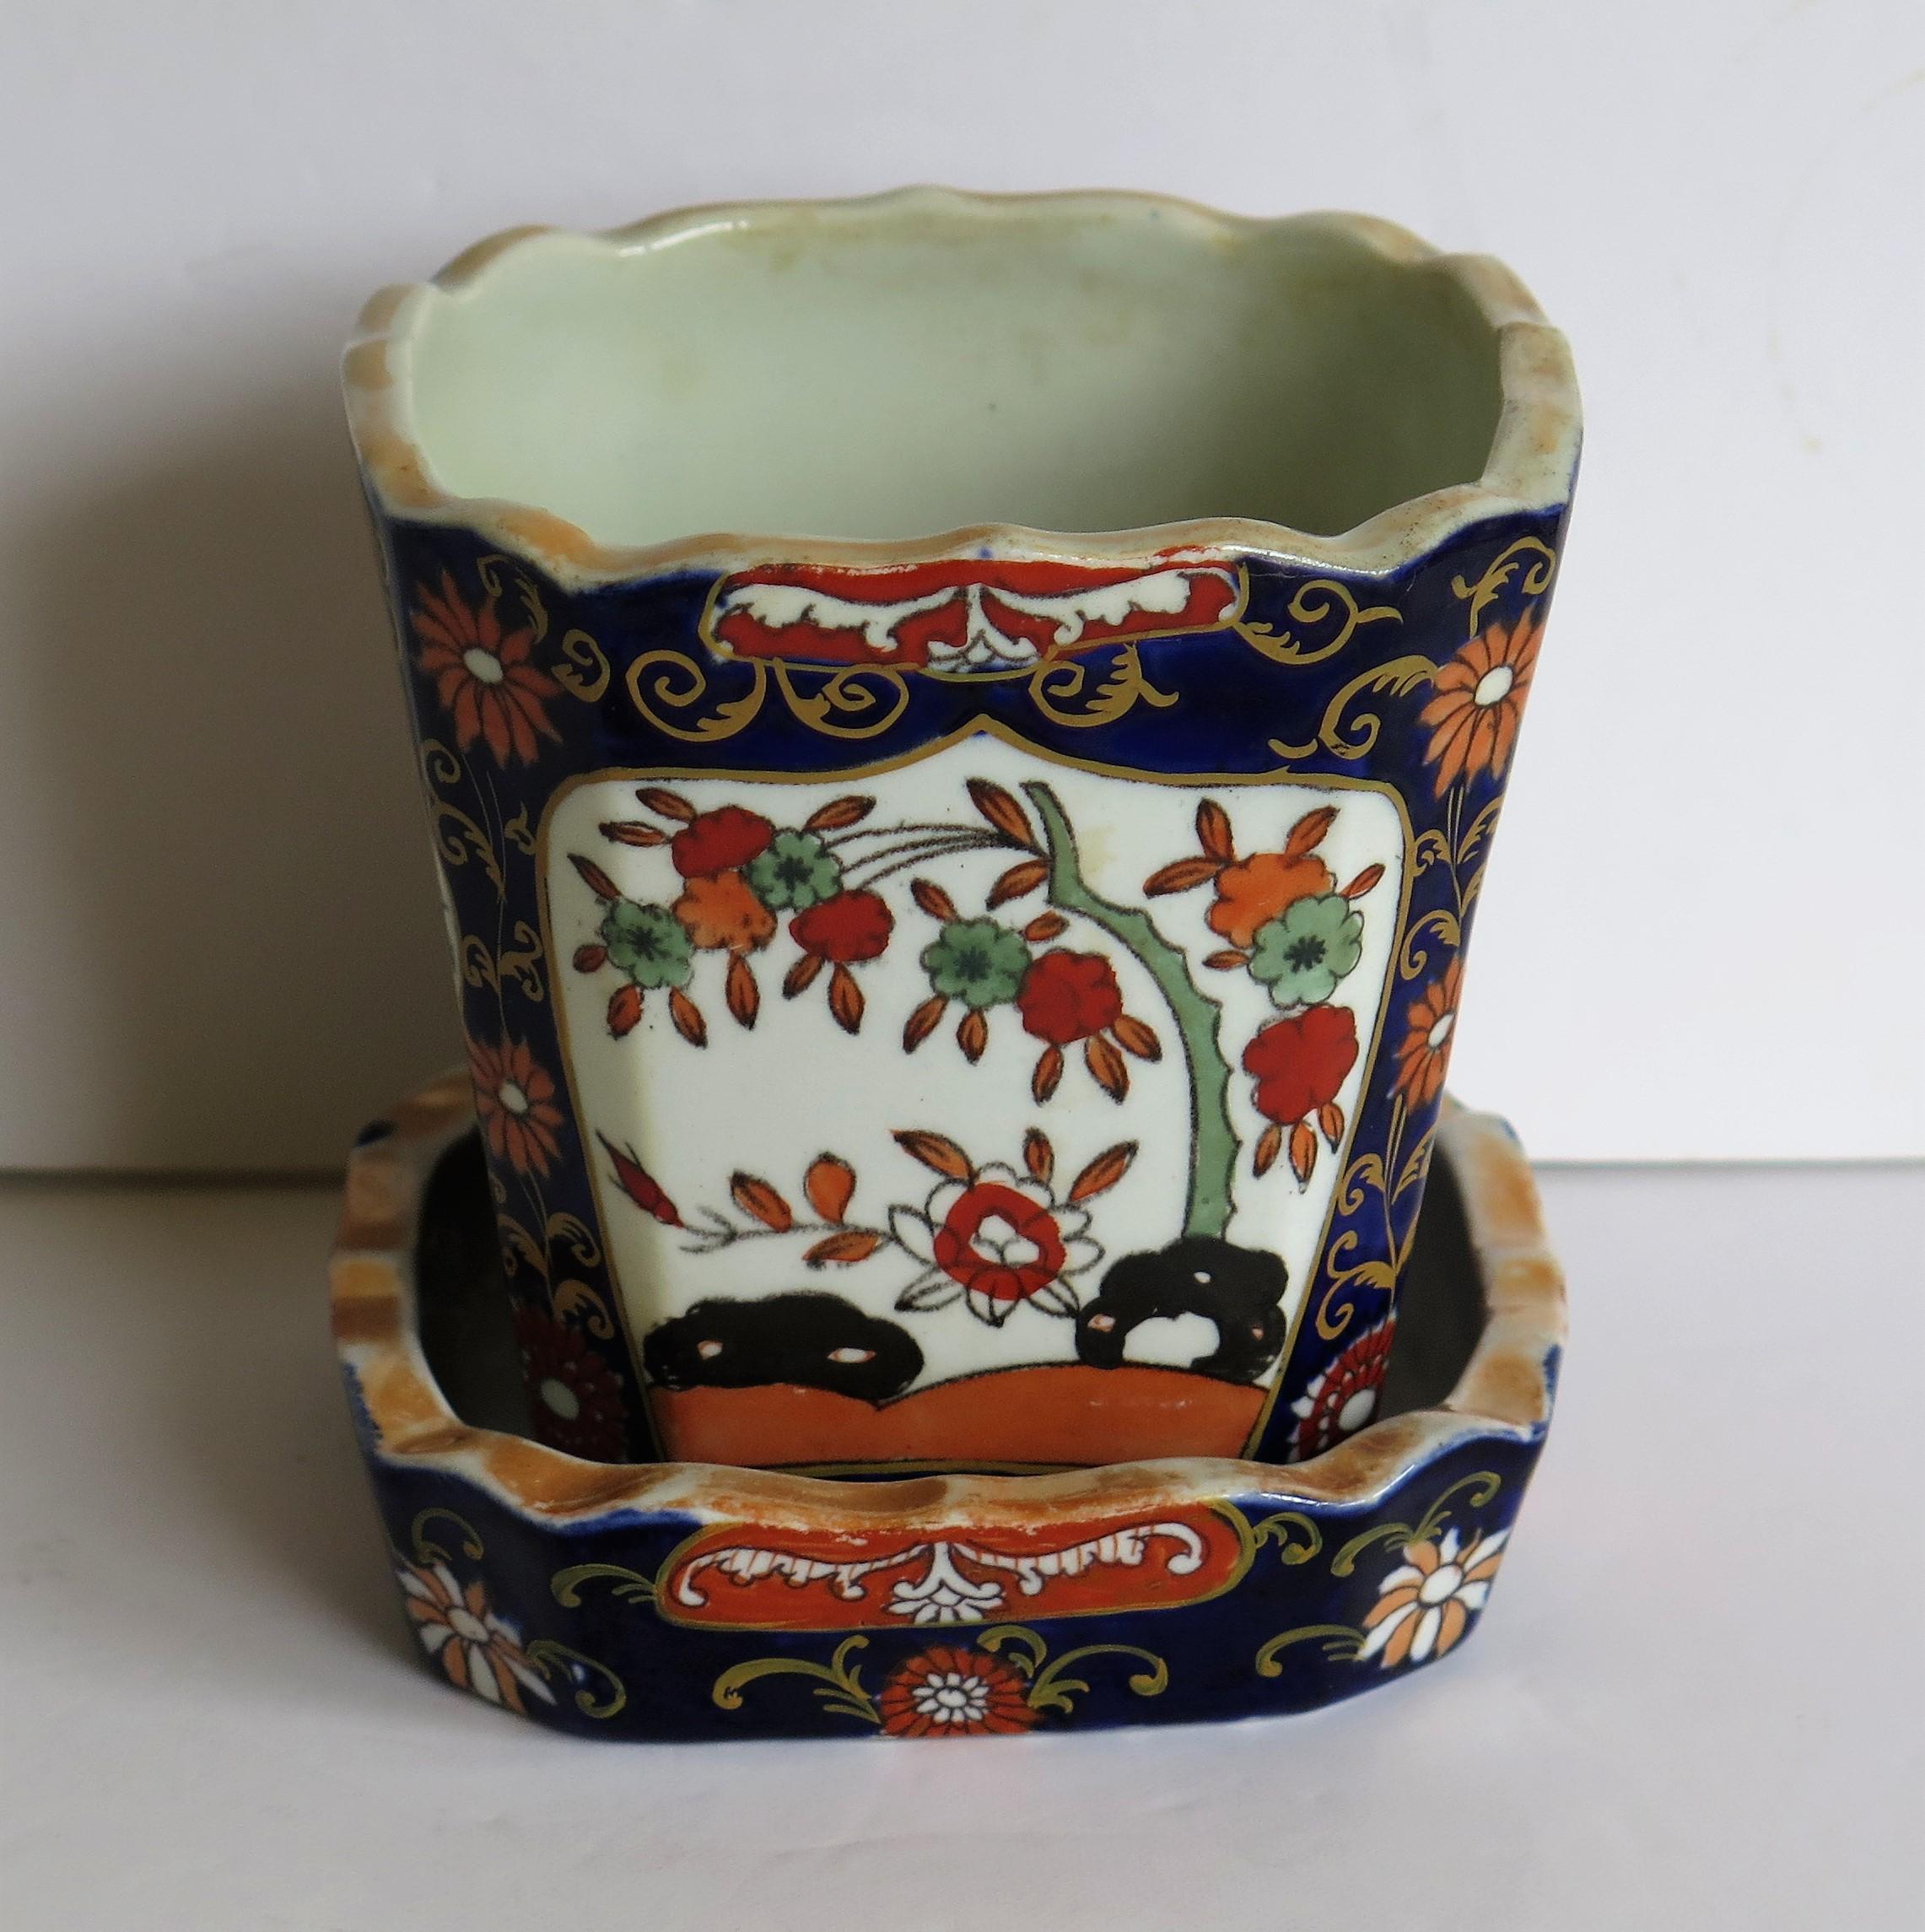 This is an ironstone Jardinière or Plant Pot complete with under-tray or stand in the blue Hawthorne and fence and bowl pattern, made by Mason's Ironstone of Lane Delph, Staffordshire, England, during the first half of the 19th century, circa